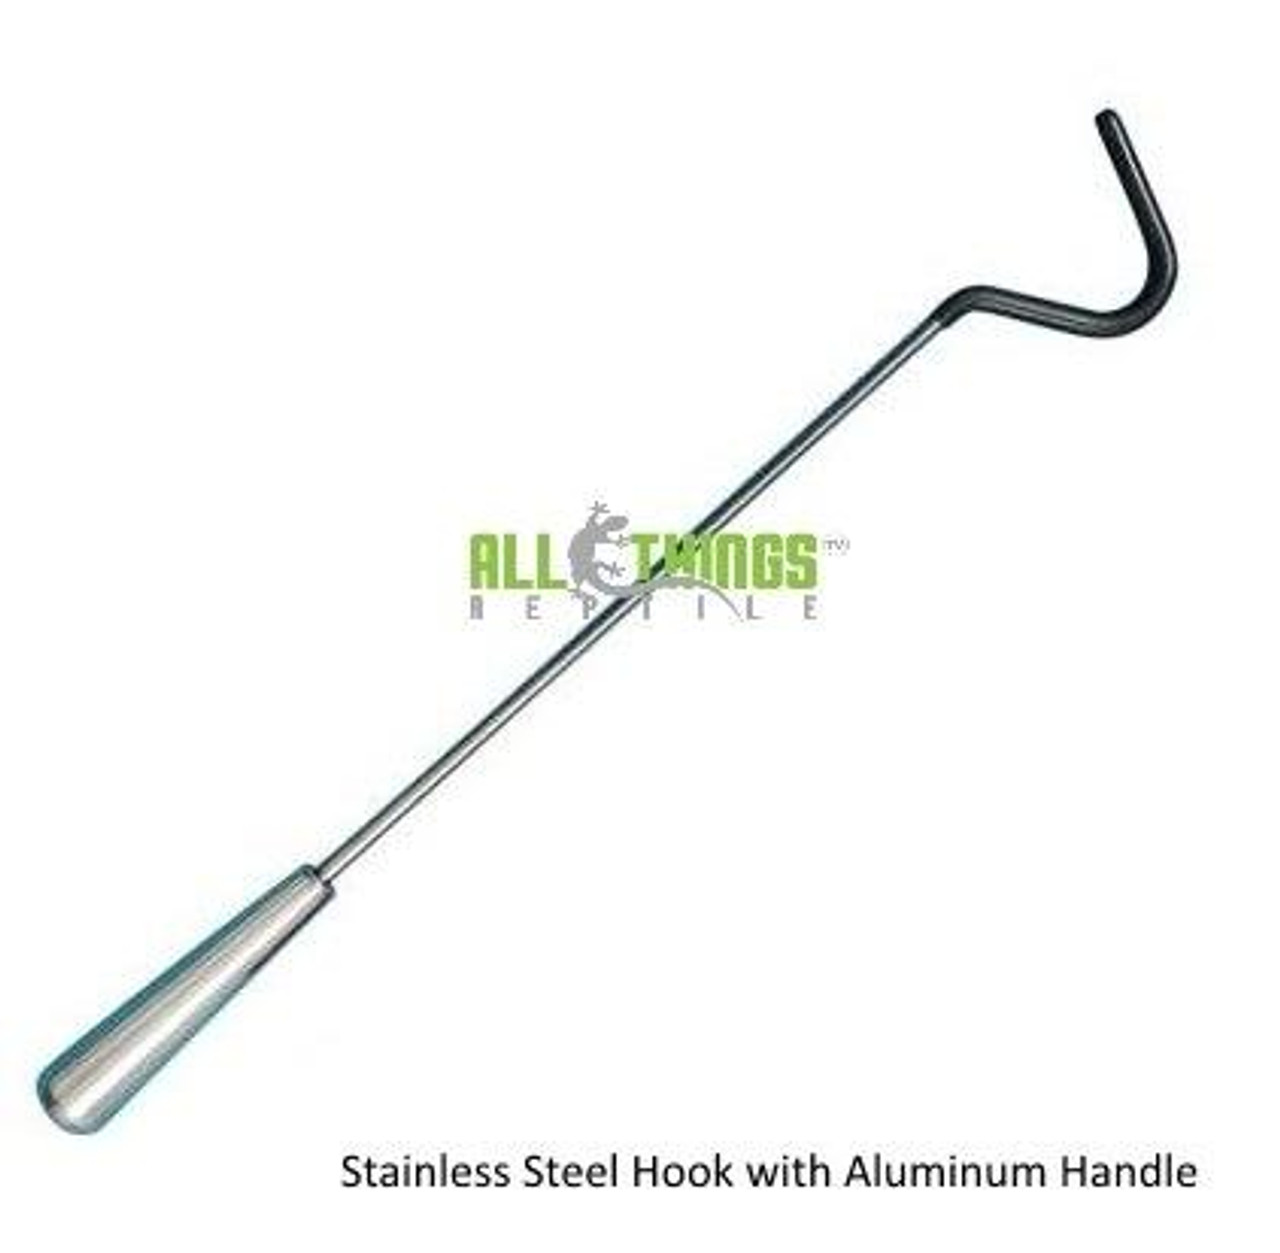 All Things Reptile ATR Black Stainless Steel Snake Hook 24 with Aluminum Handle Retail Packaging